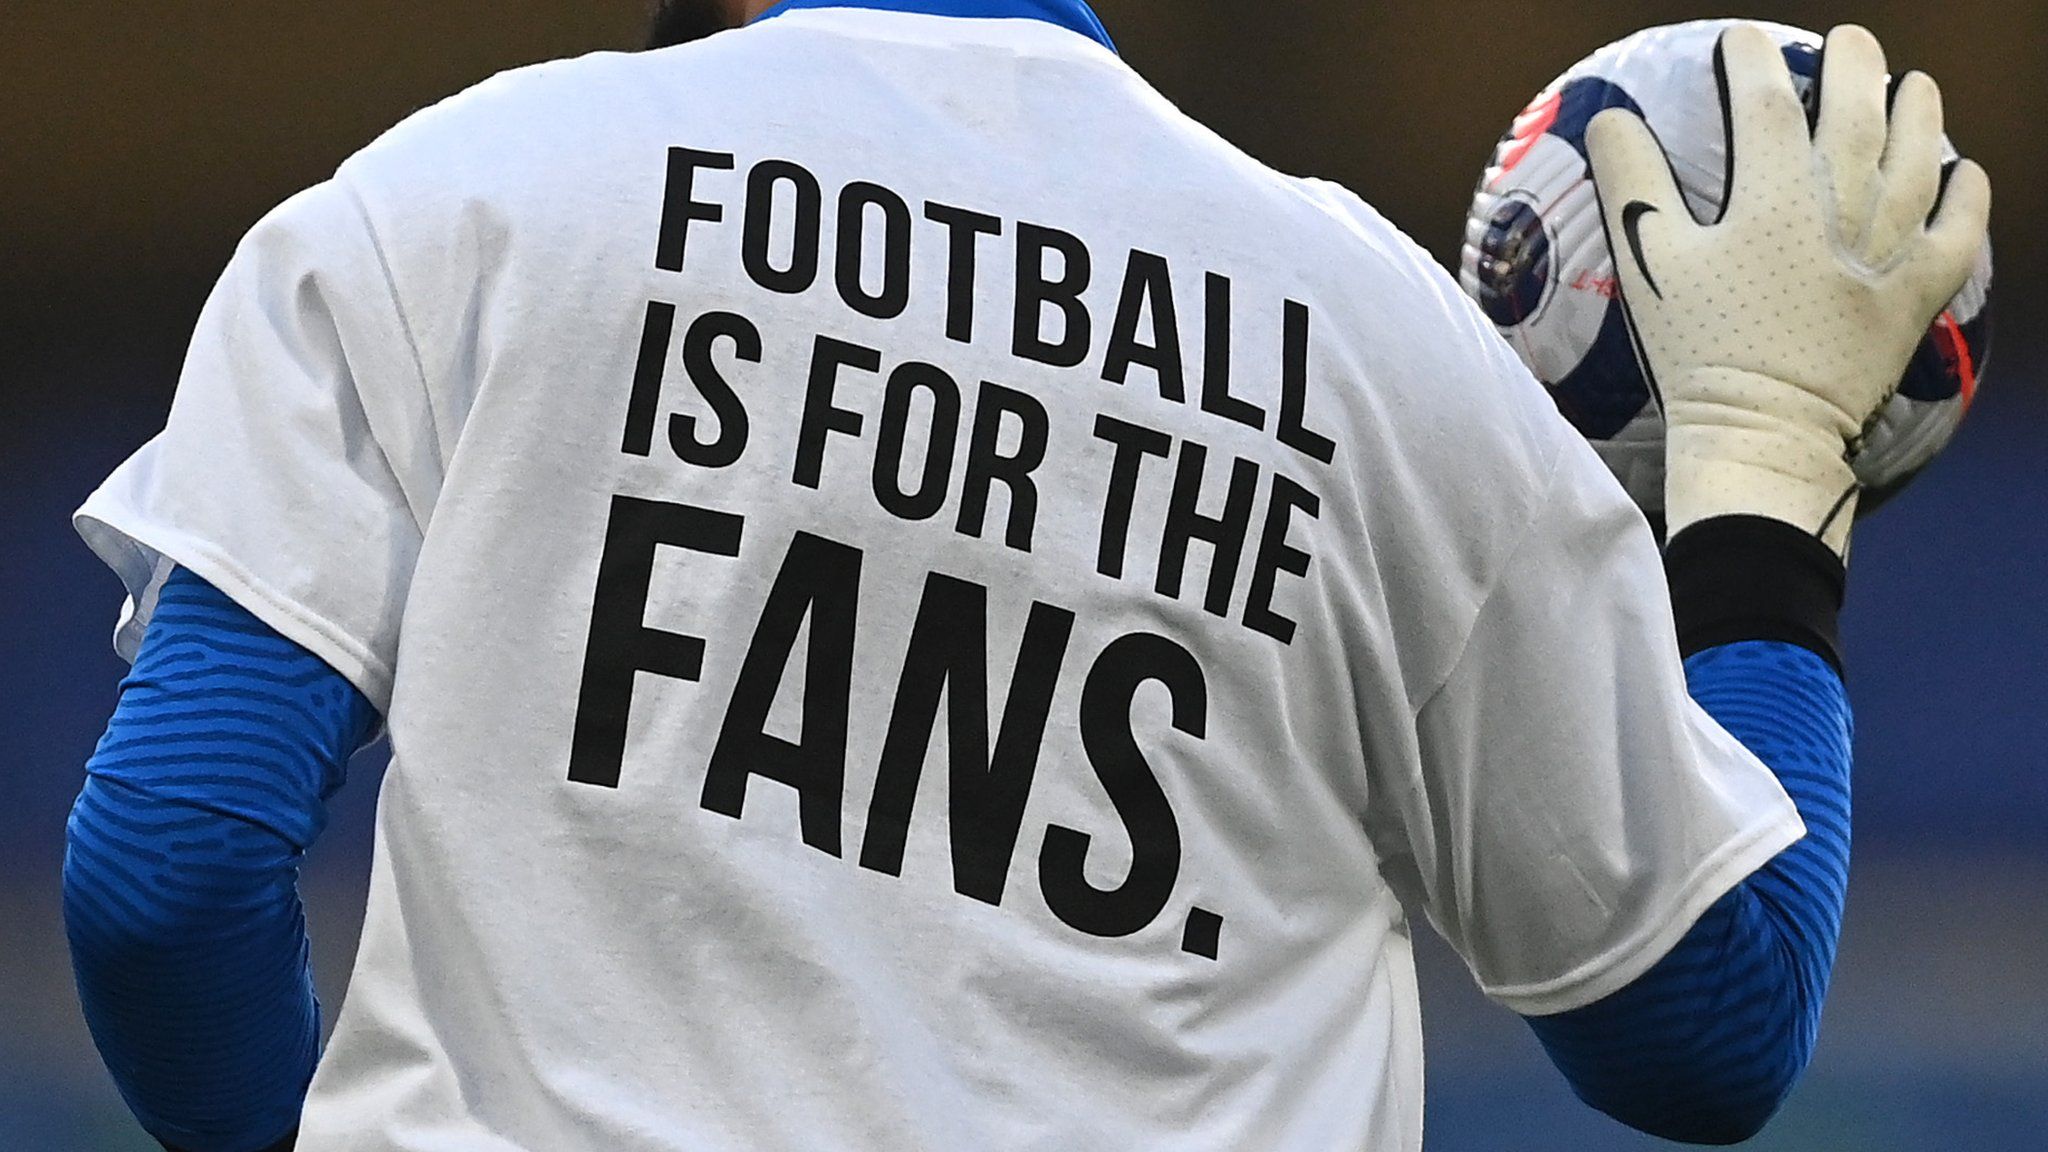 A Brighton player wears a t-shirt with the slogan 'Football is for the fans' on the back in protest against the proposed European Super League before a match against Chelsea